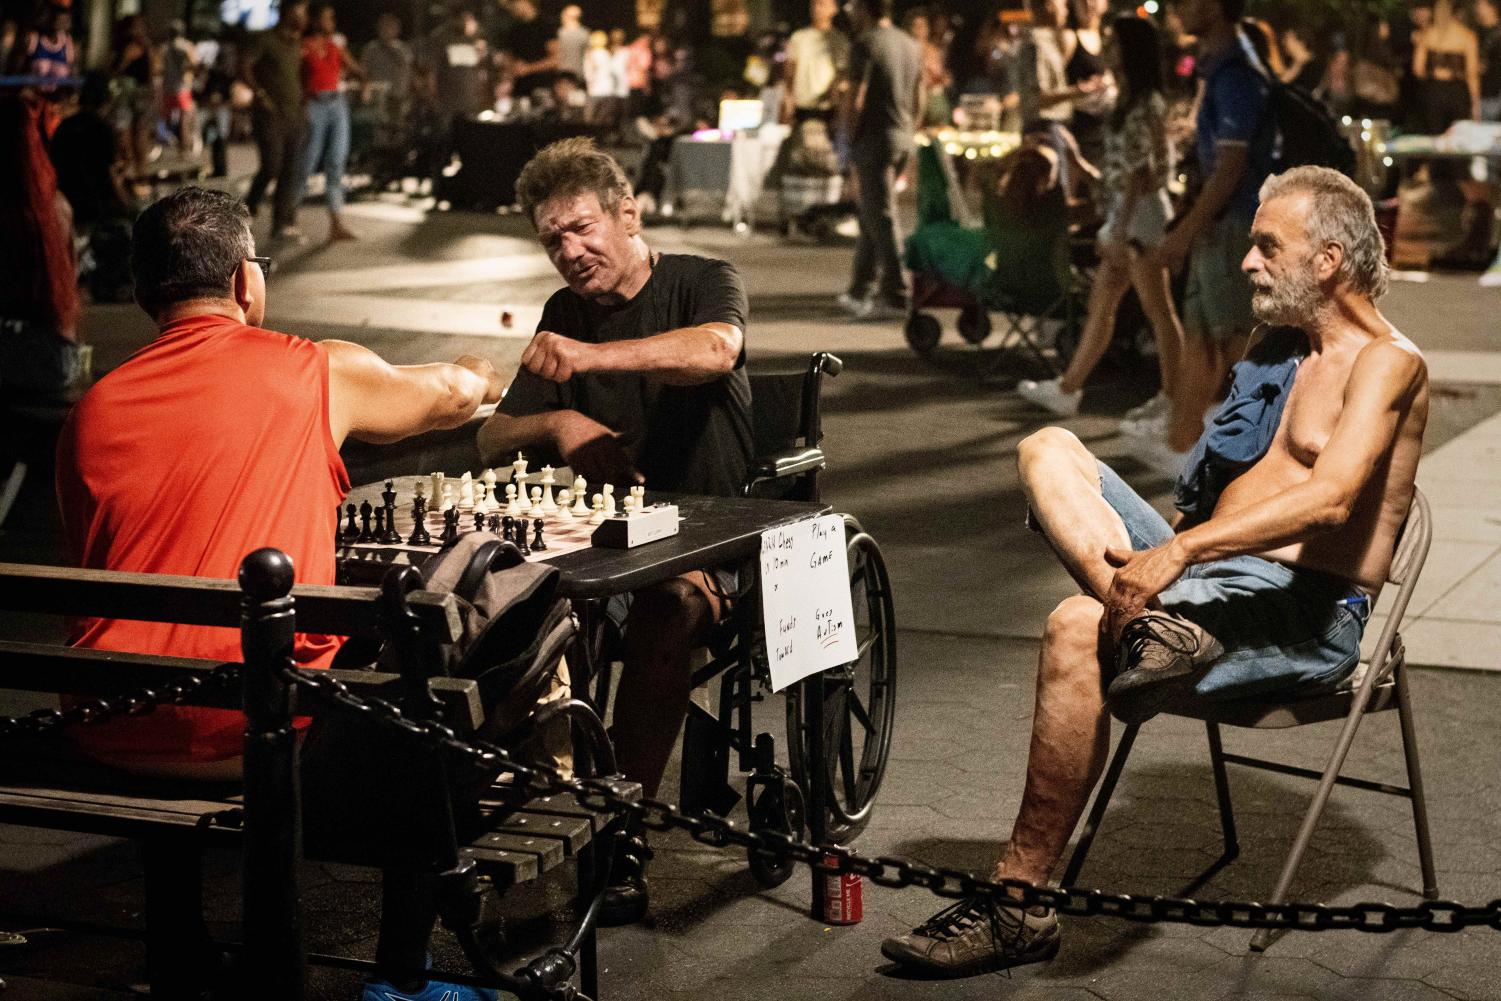 A man wearing a red shirt and a man wearing a black shirt sit facing each other. Between them on a black table is a brown-and-tan wooden chess board. Next to them on a foldable chair sits a man with gray hair, no shirt and blue jean shorts.